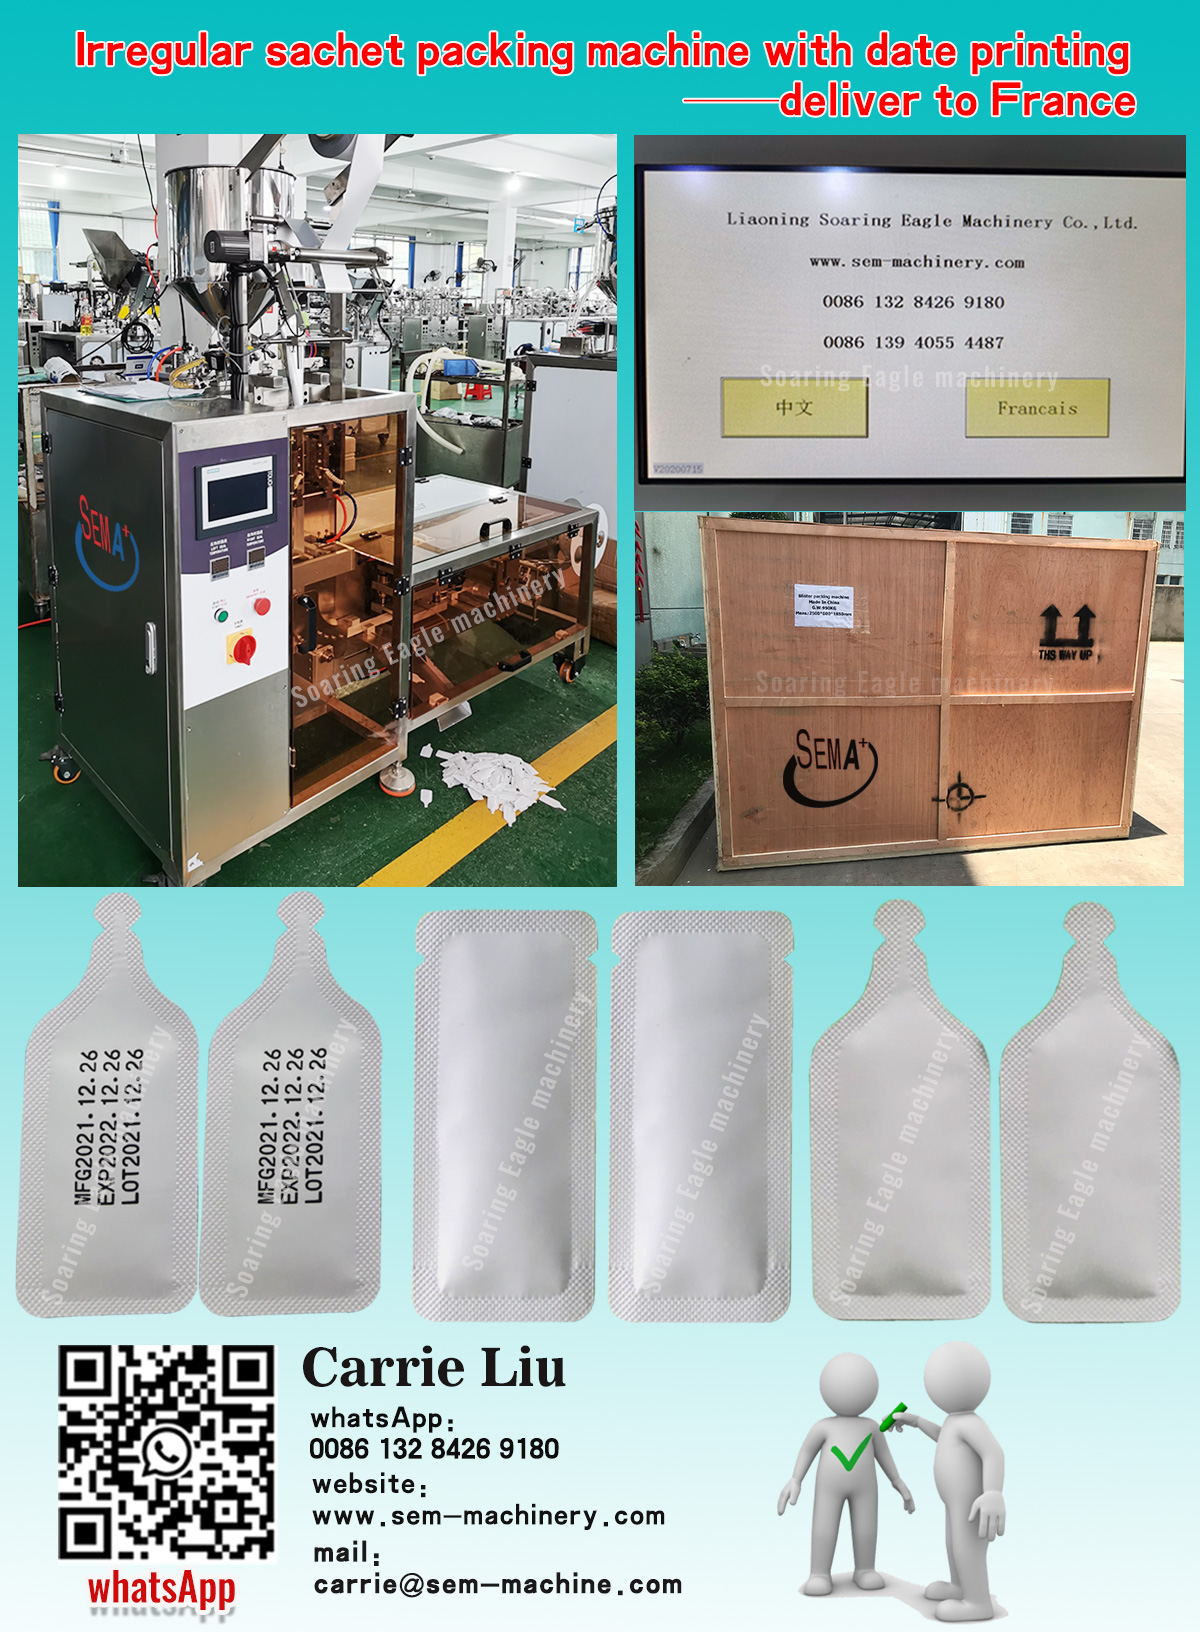 Irregular sachet packing machine with date printing—deliver to France